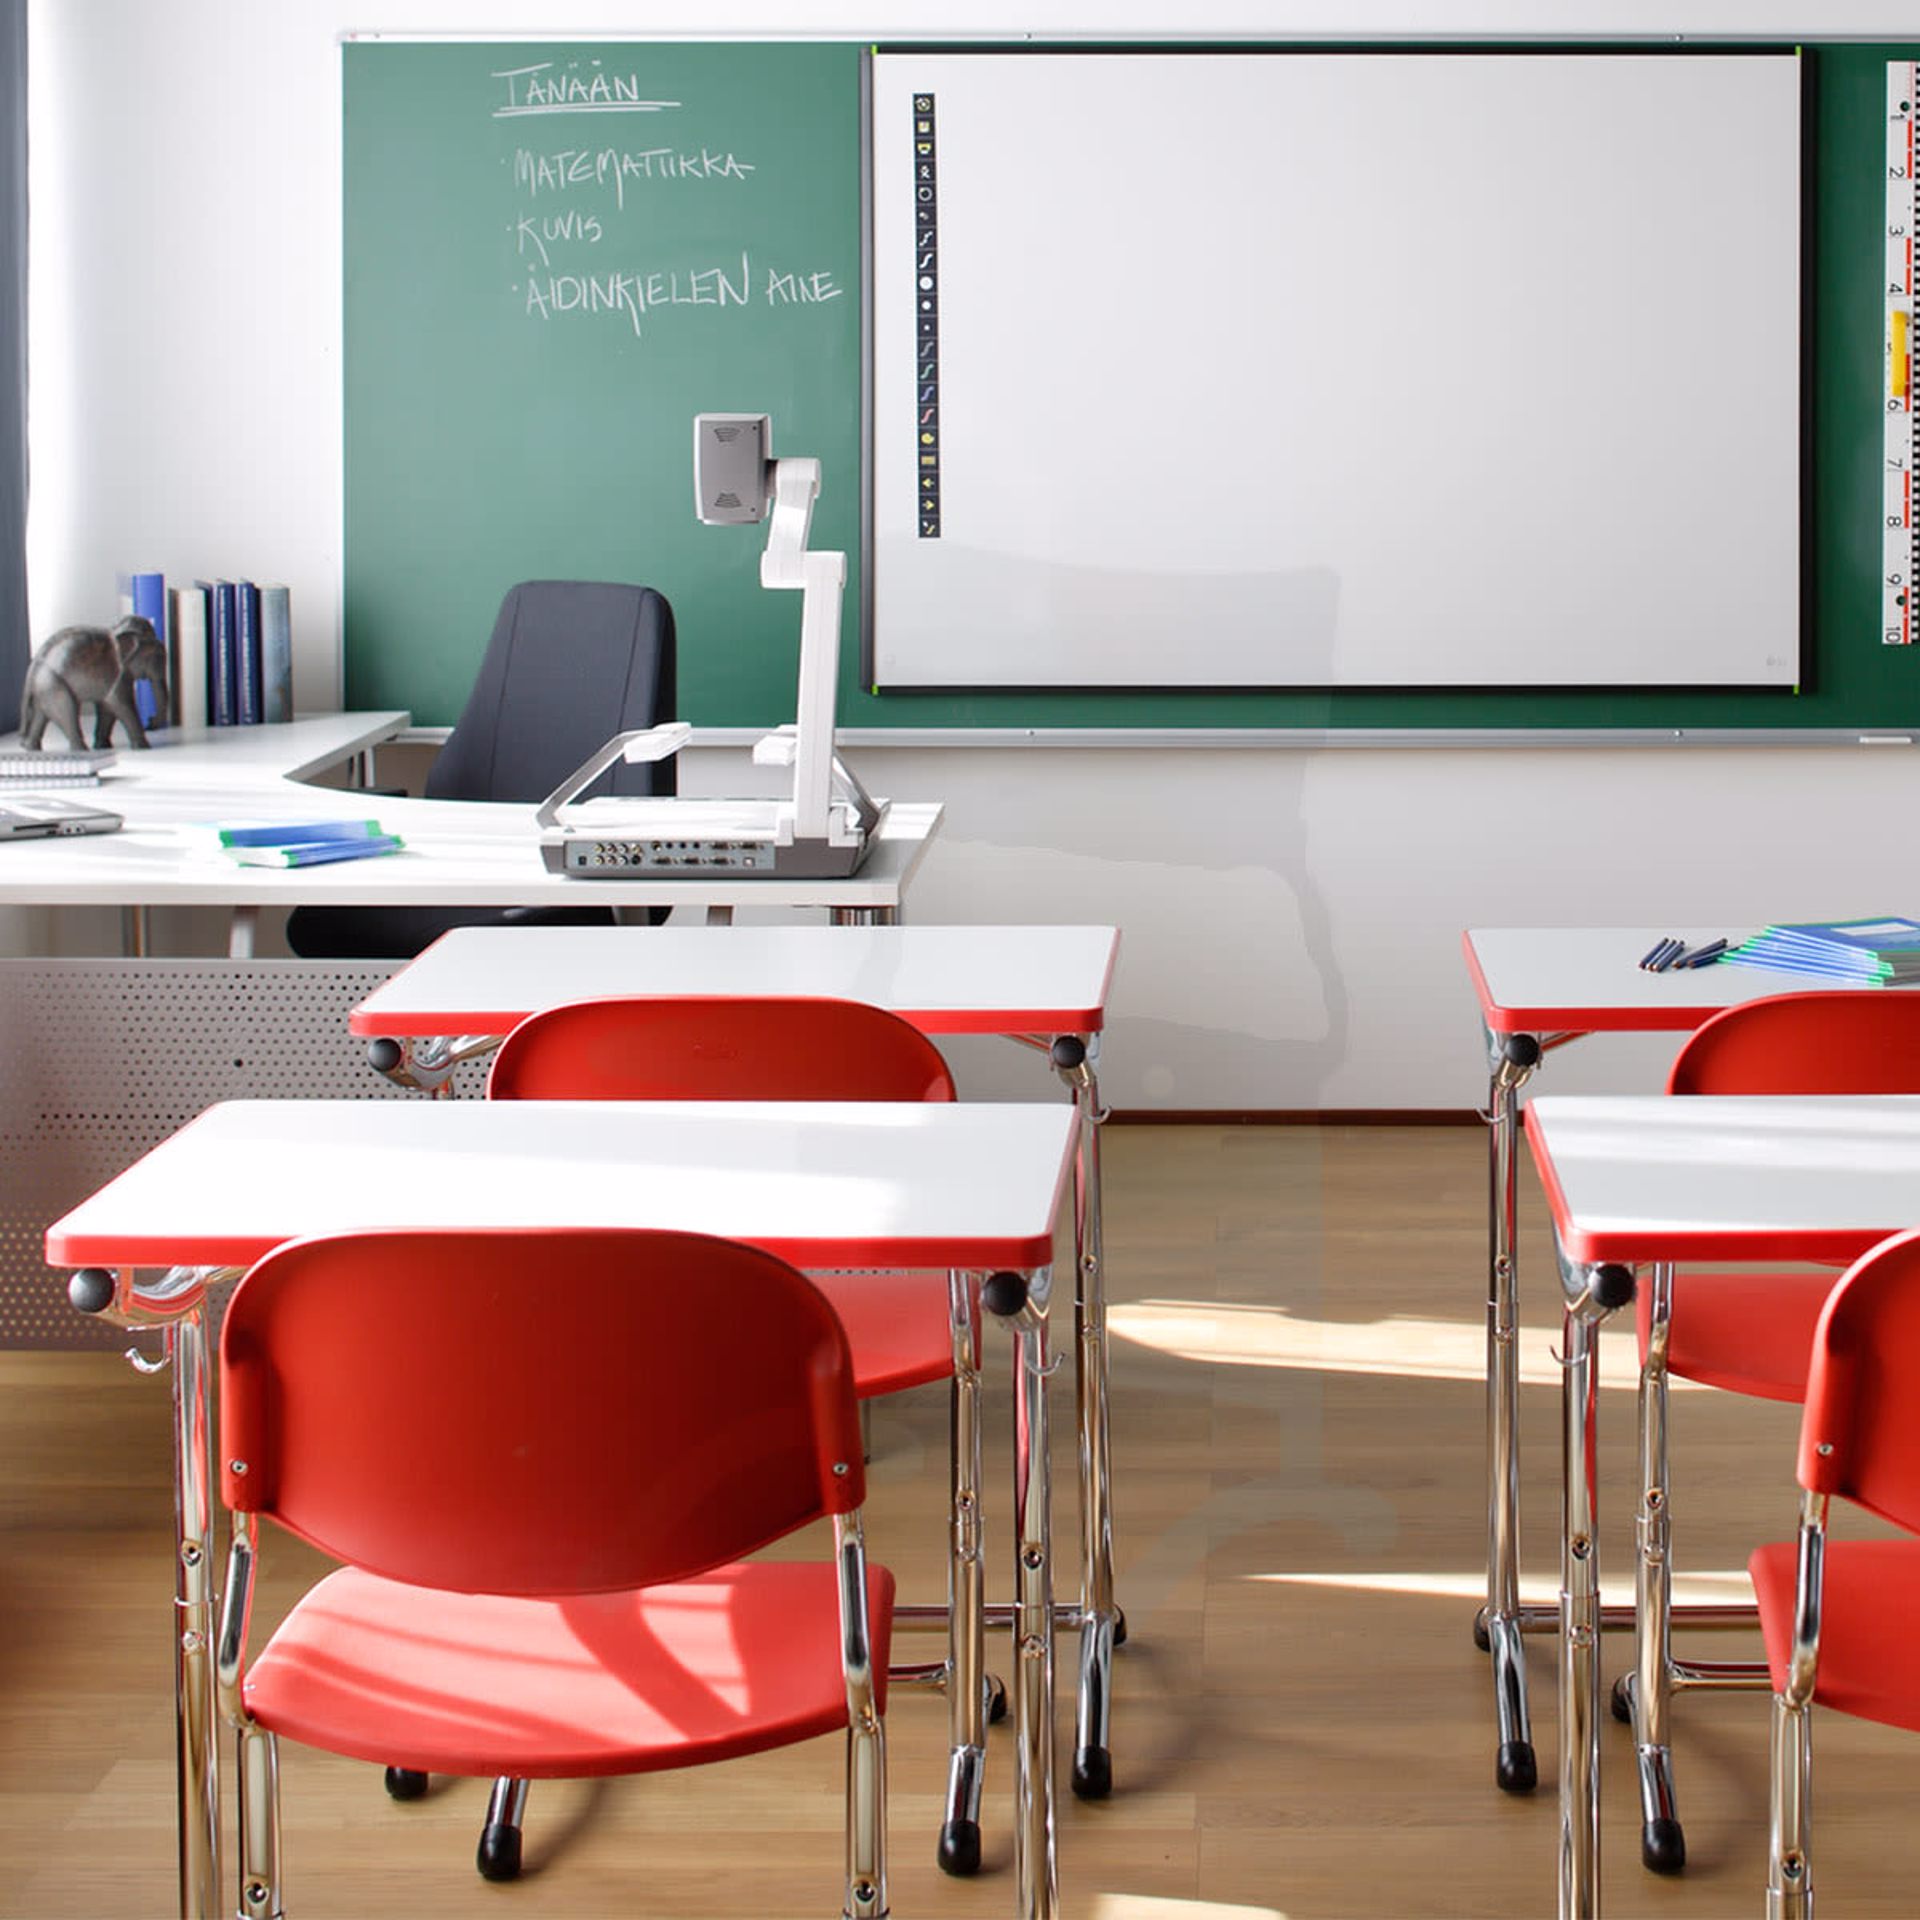 Mobilier spatii educationale